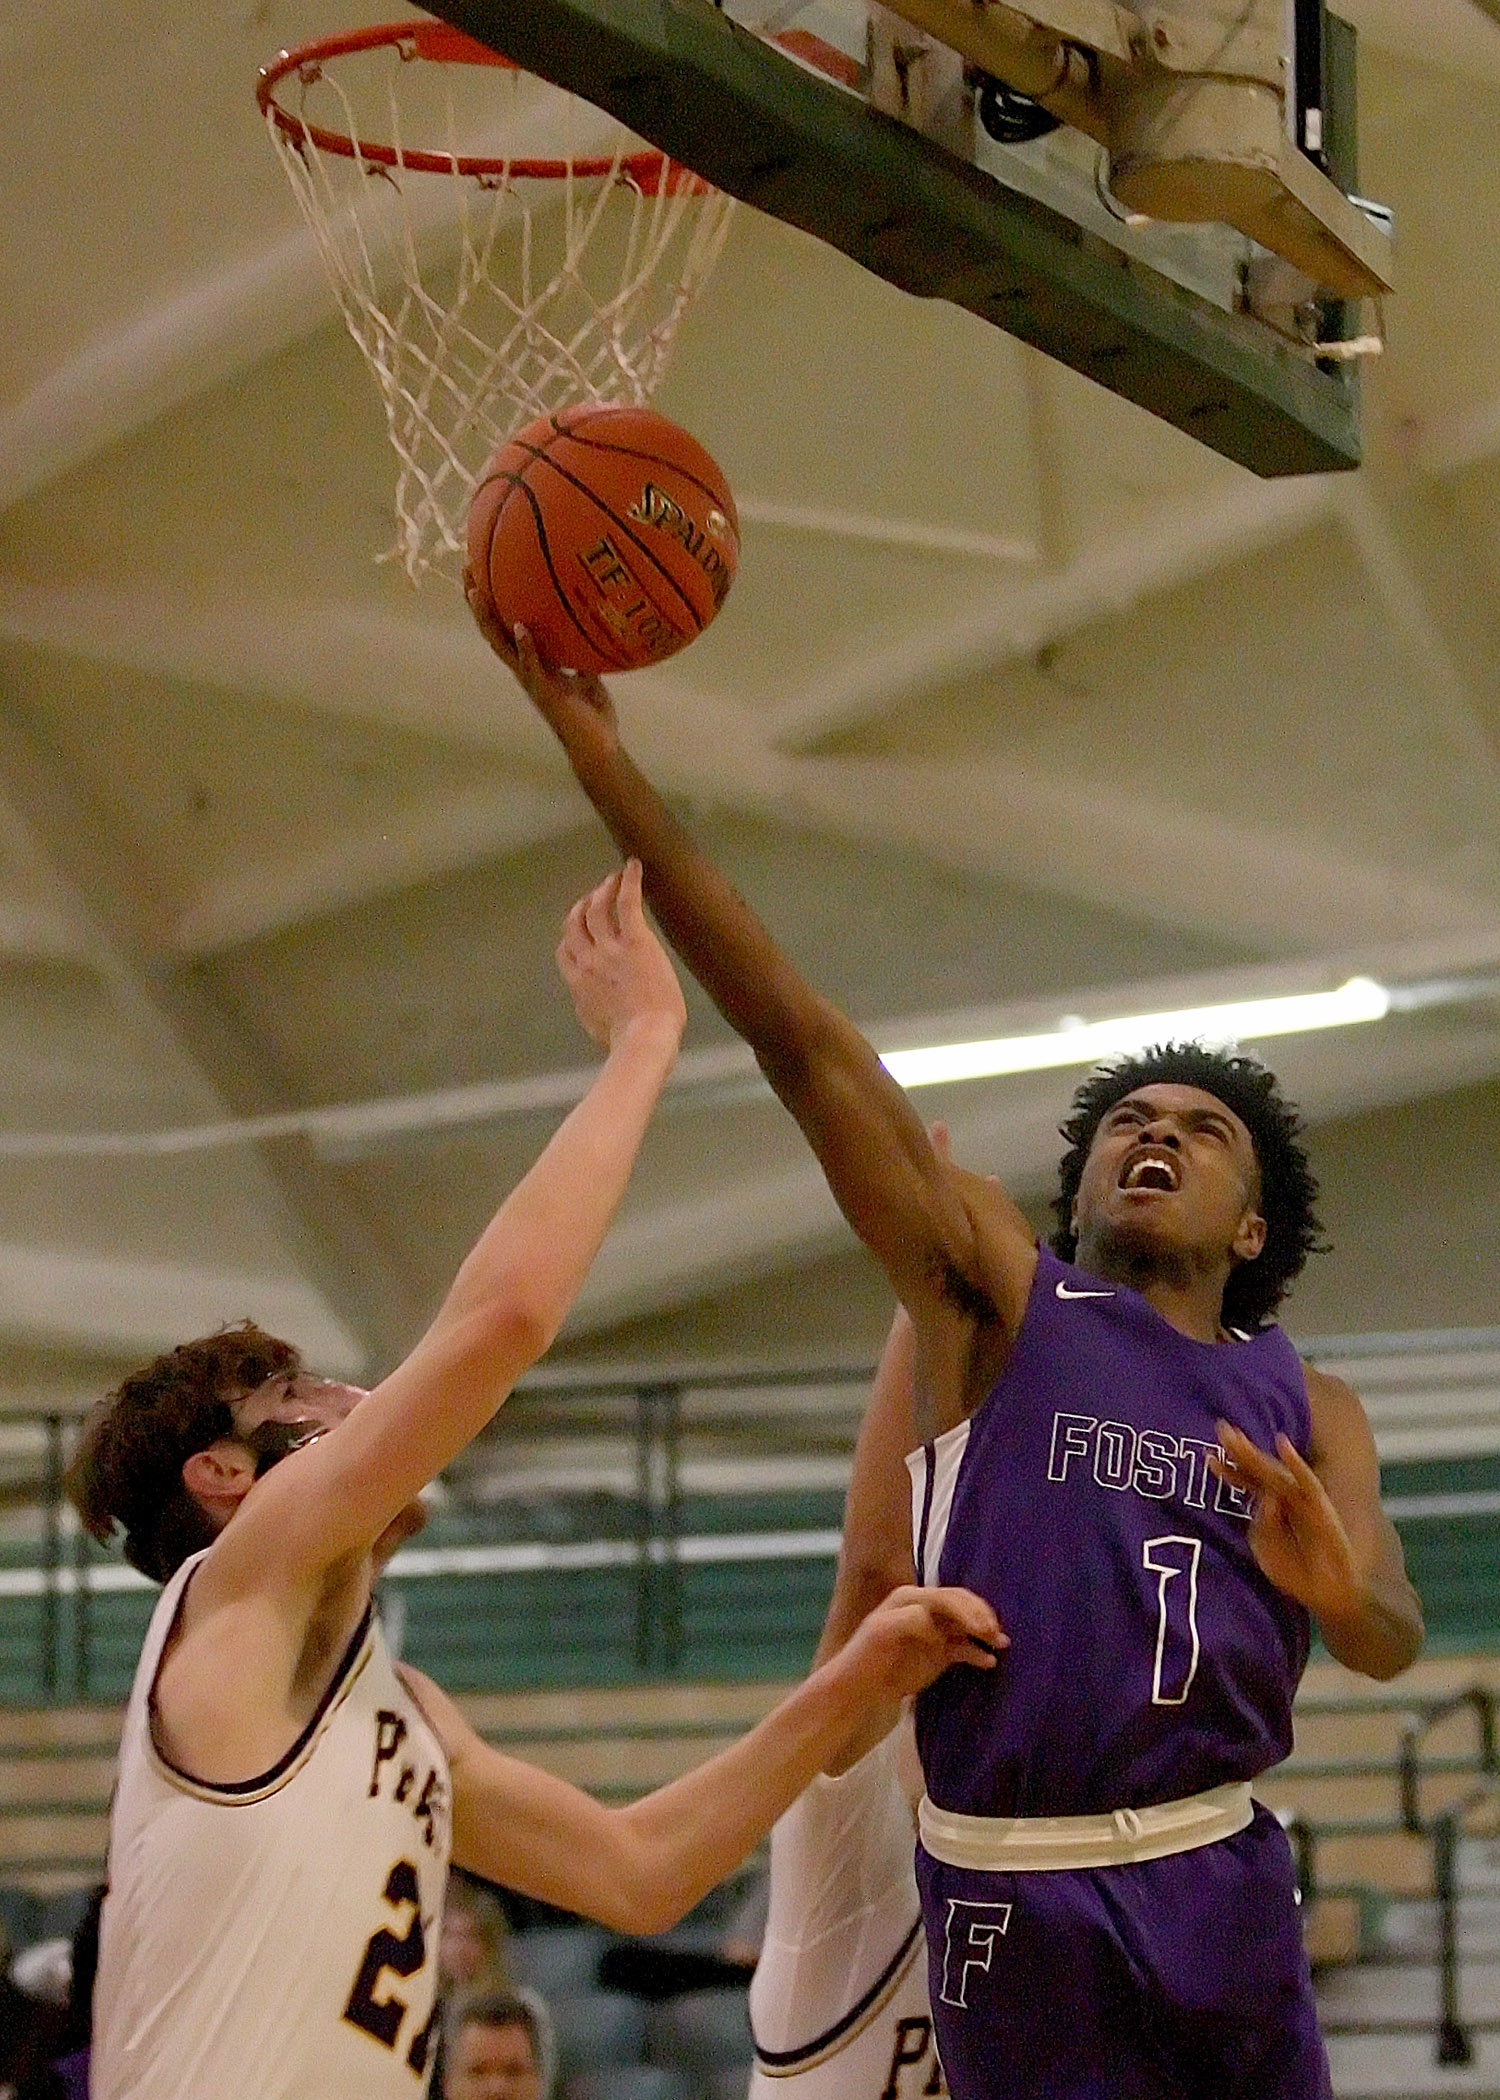  Isaiah Ford of Foster makes a reverse layup against the defensive pressure from Highline's Riley Piper.